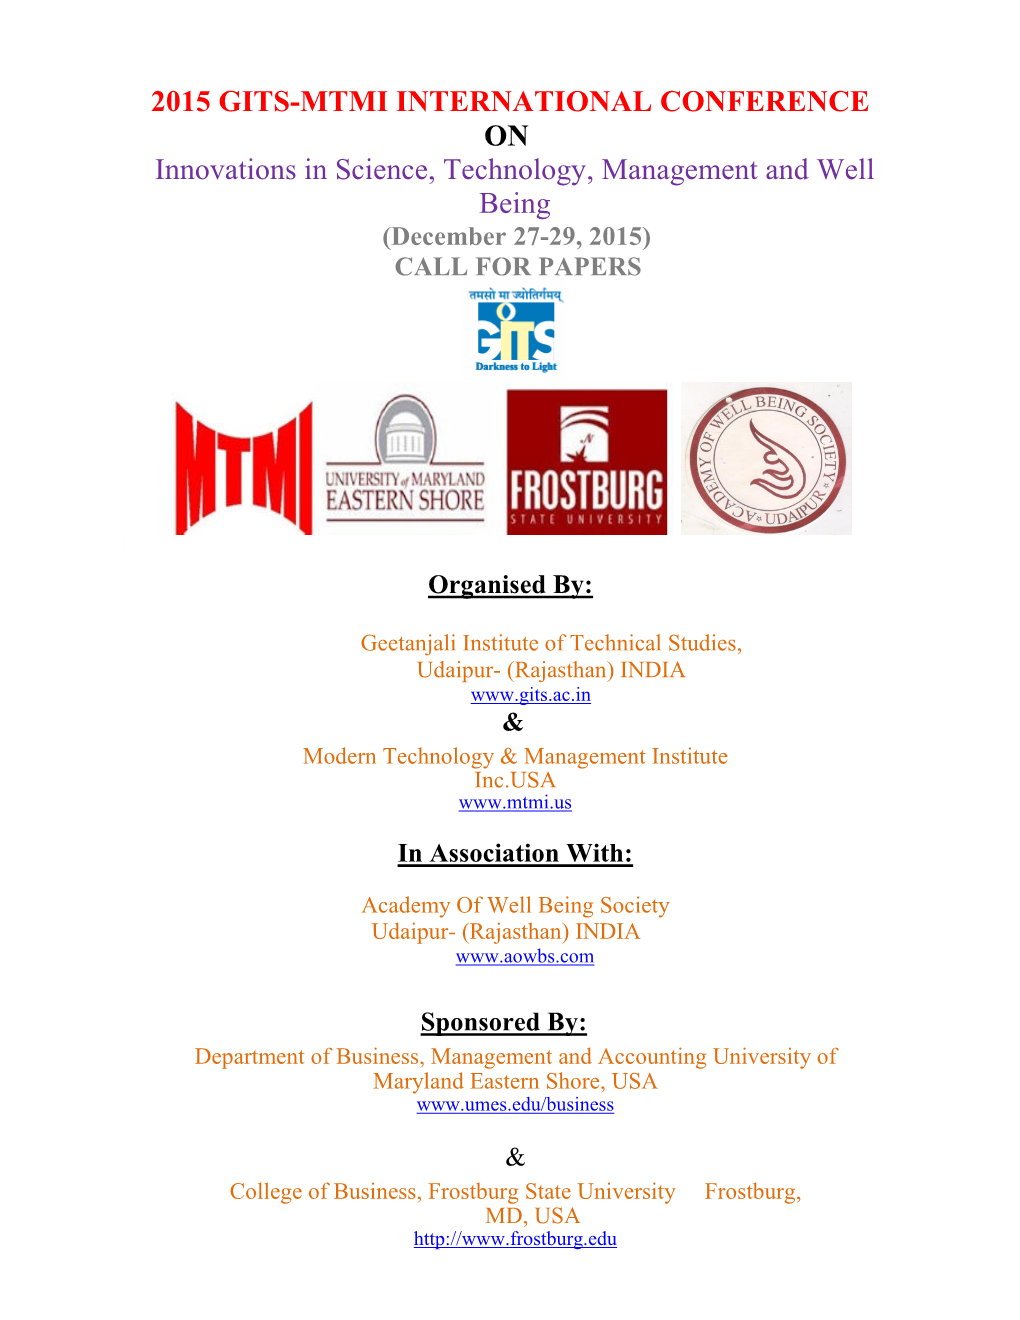 2015 GITS-MTMI INTERNATIONAL CONFERENCE on Innovations in Science, Technology, Management and Well Being (December 27-29, 2015) CALL for PAPERS